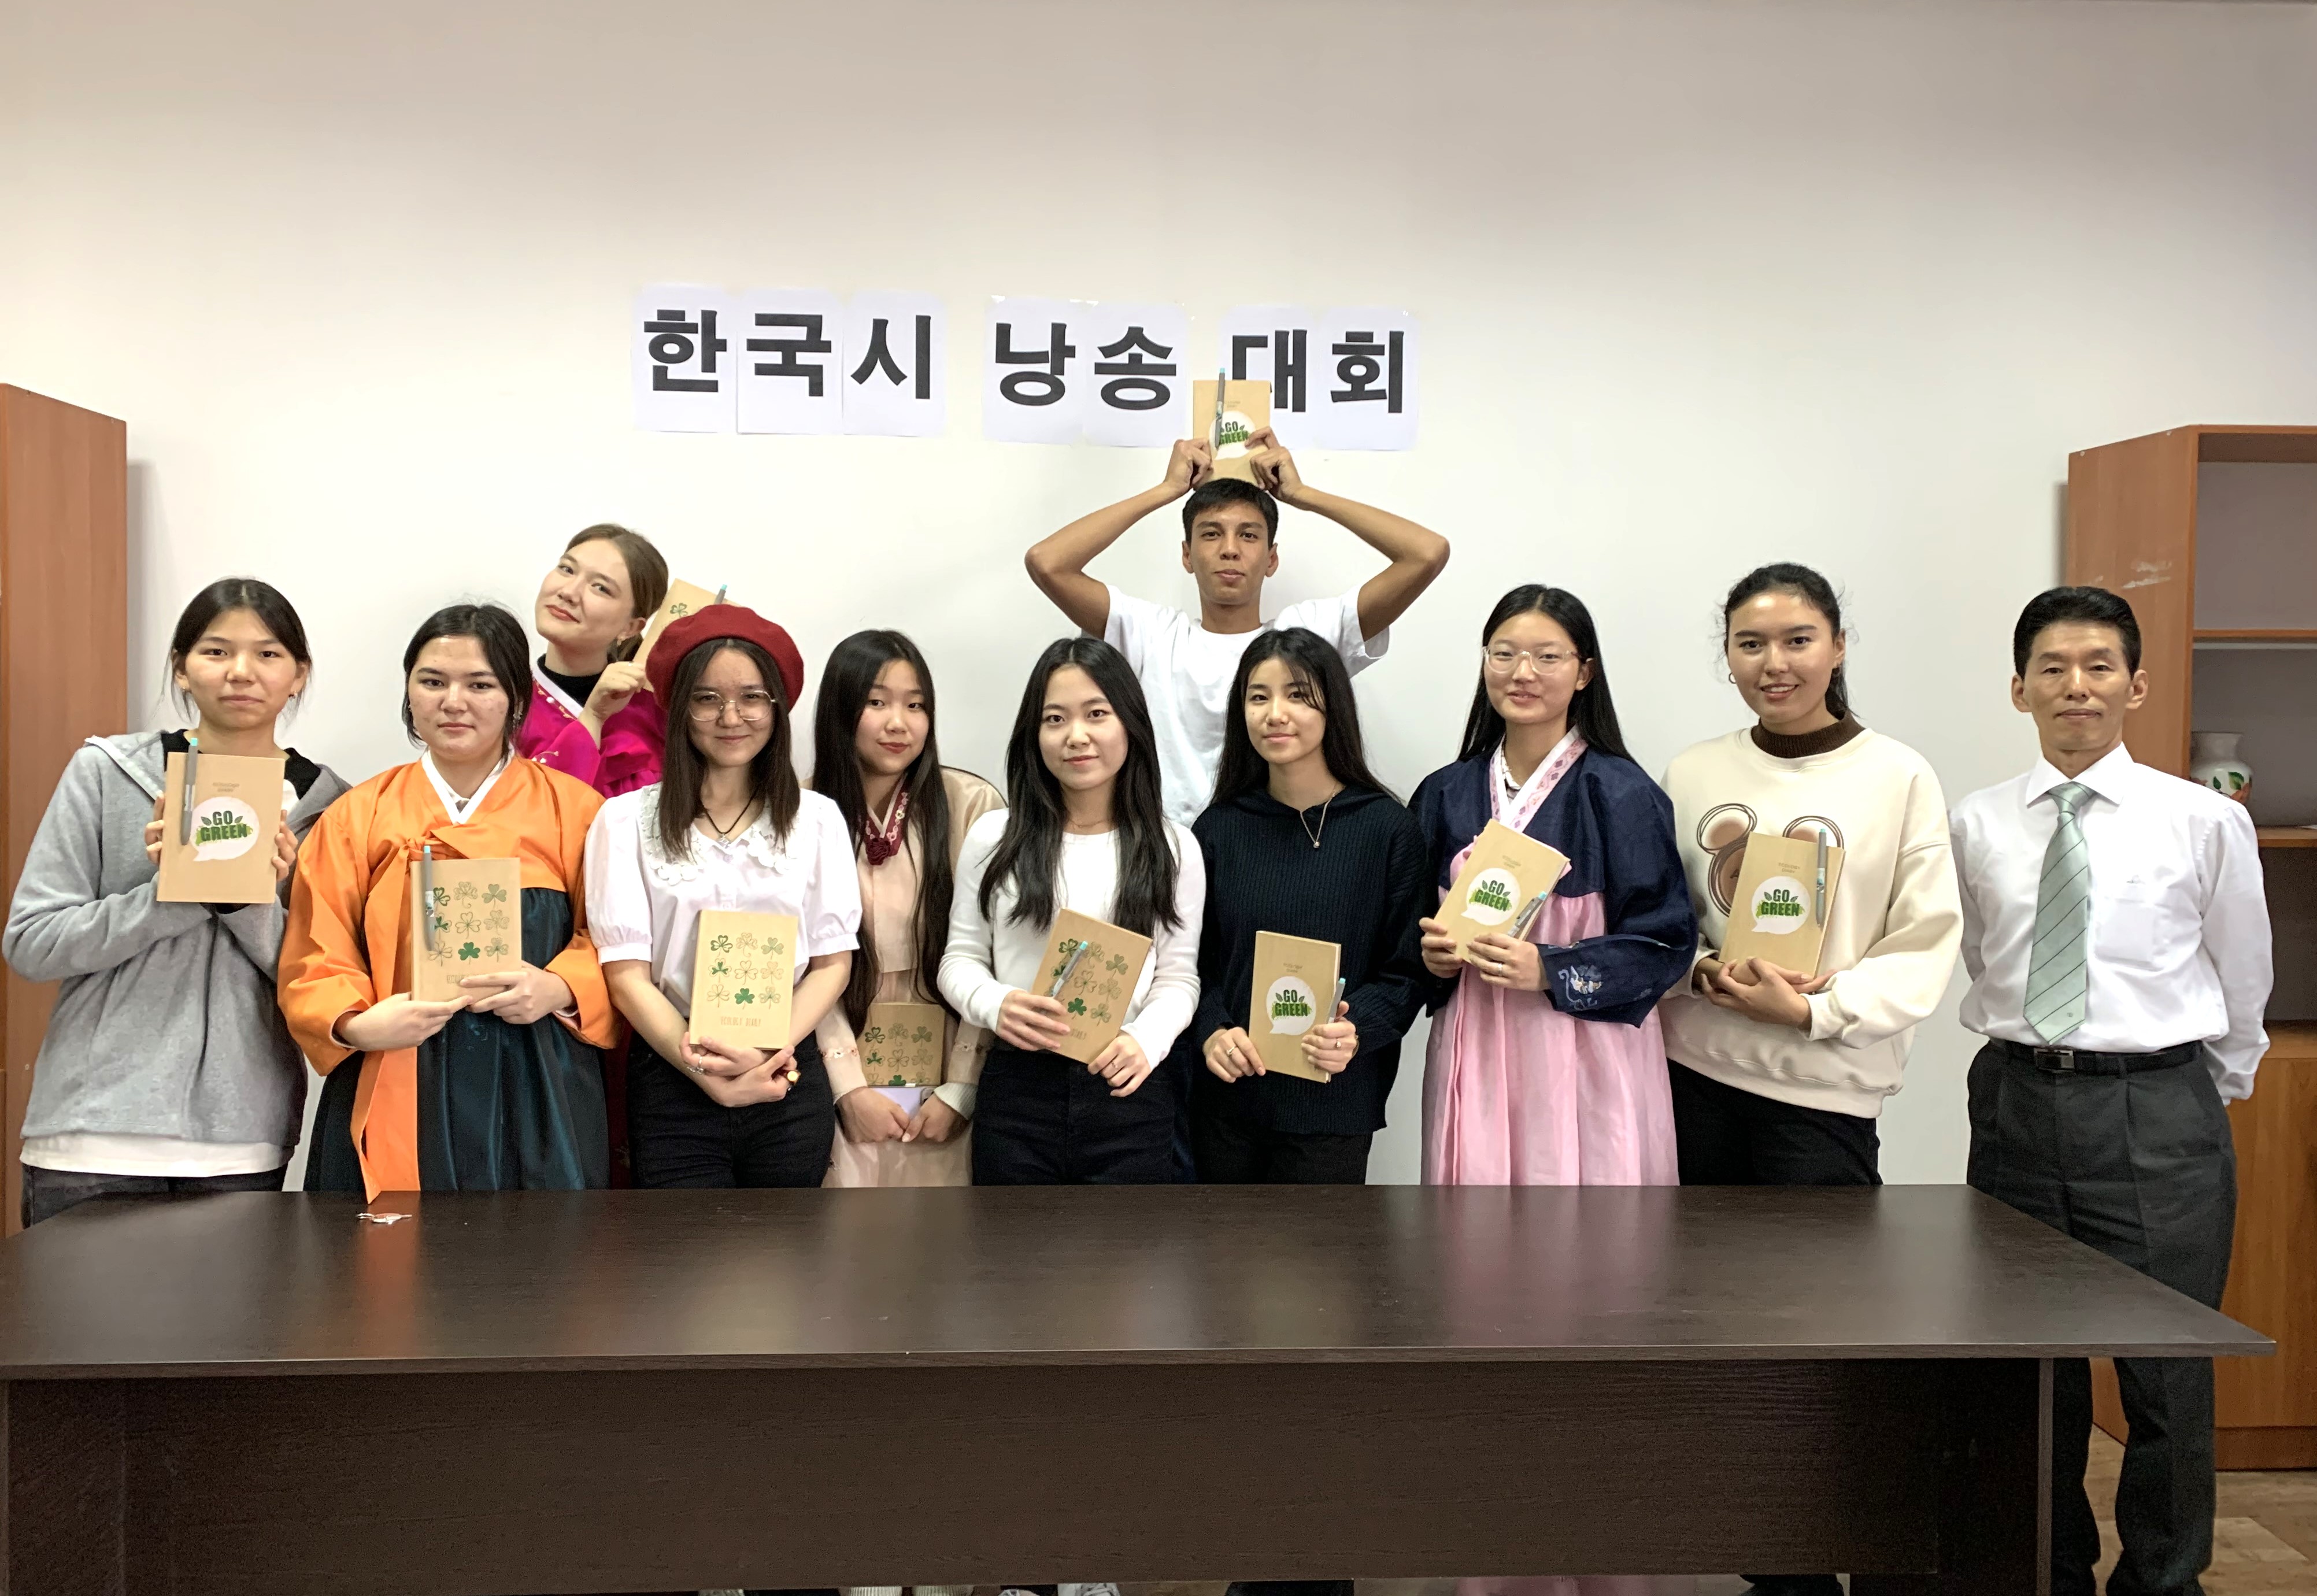 Korean poetry reading competition